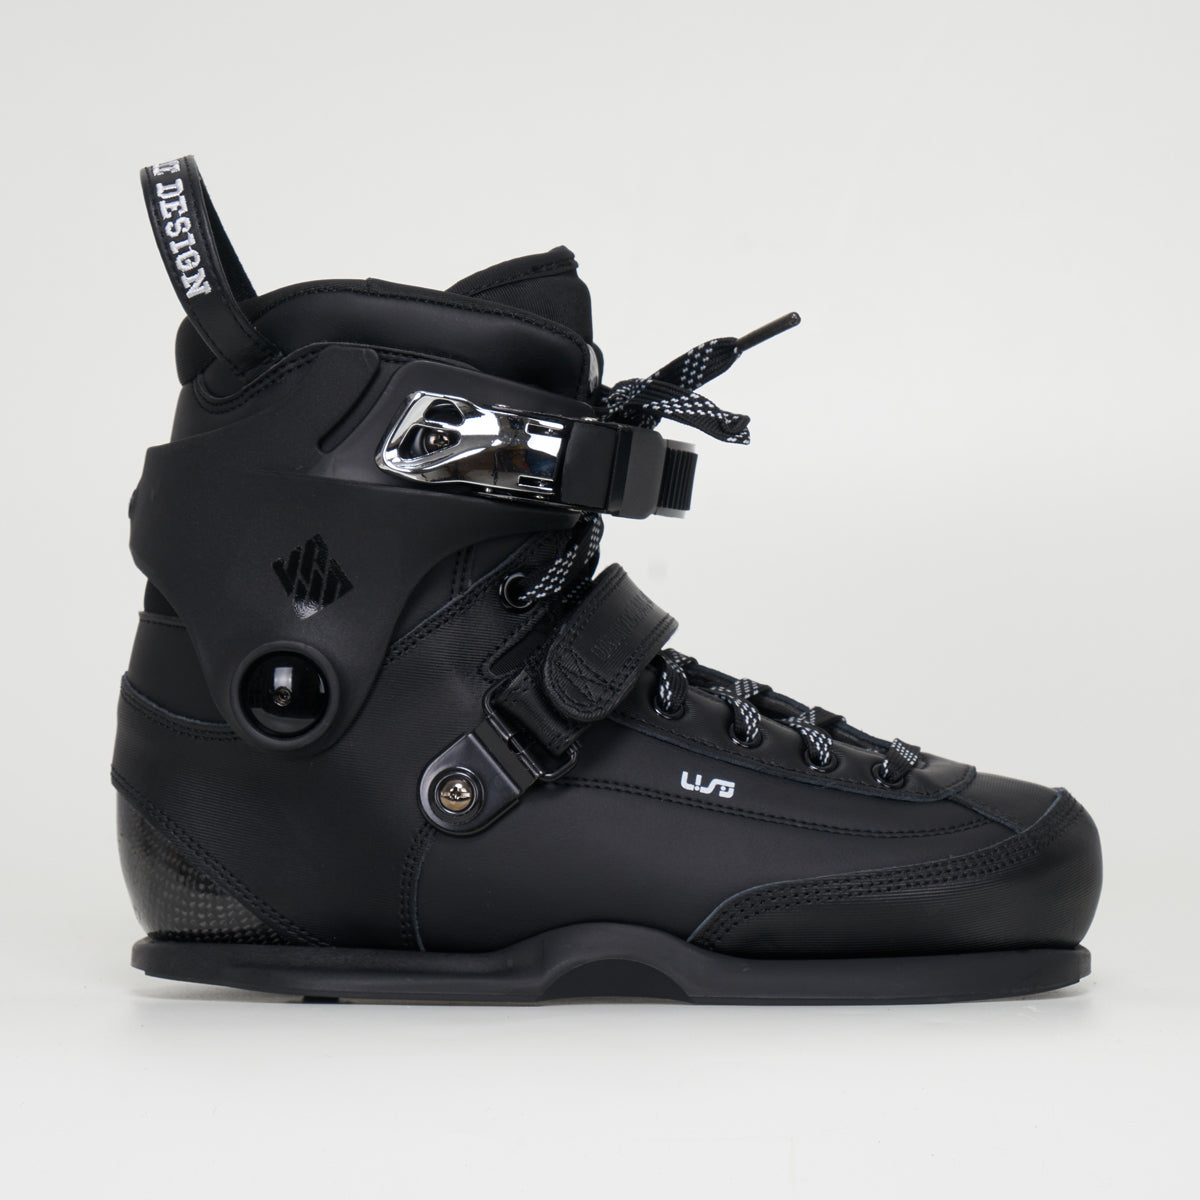 USD Carbon Boot Only Skates